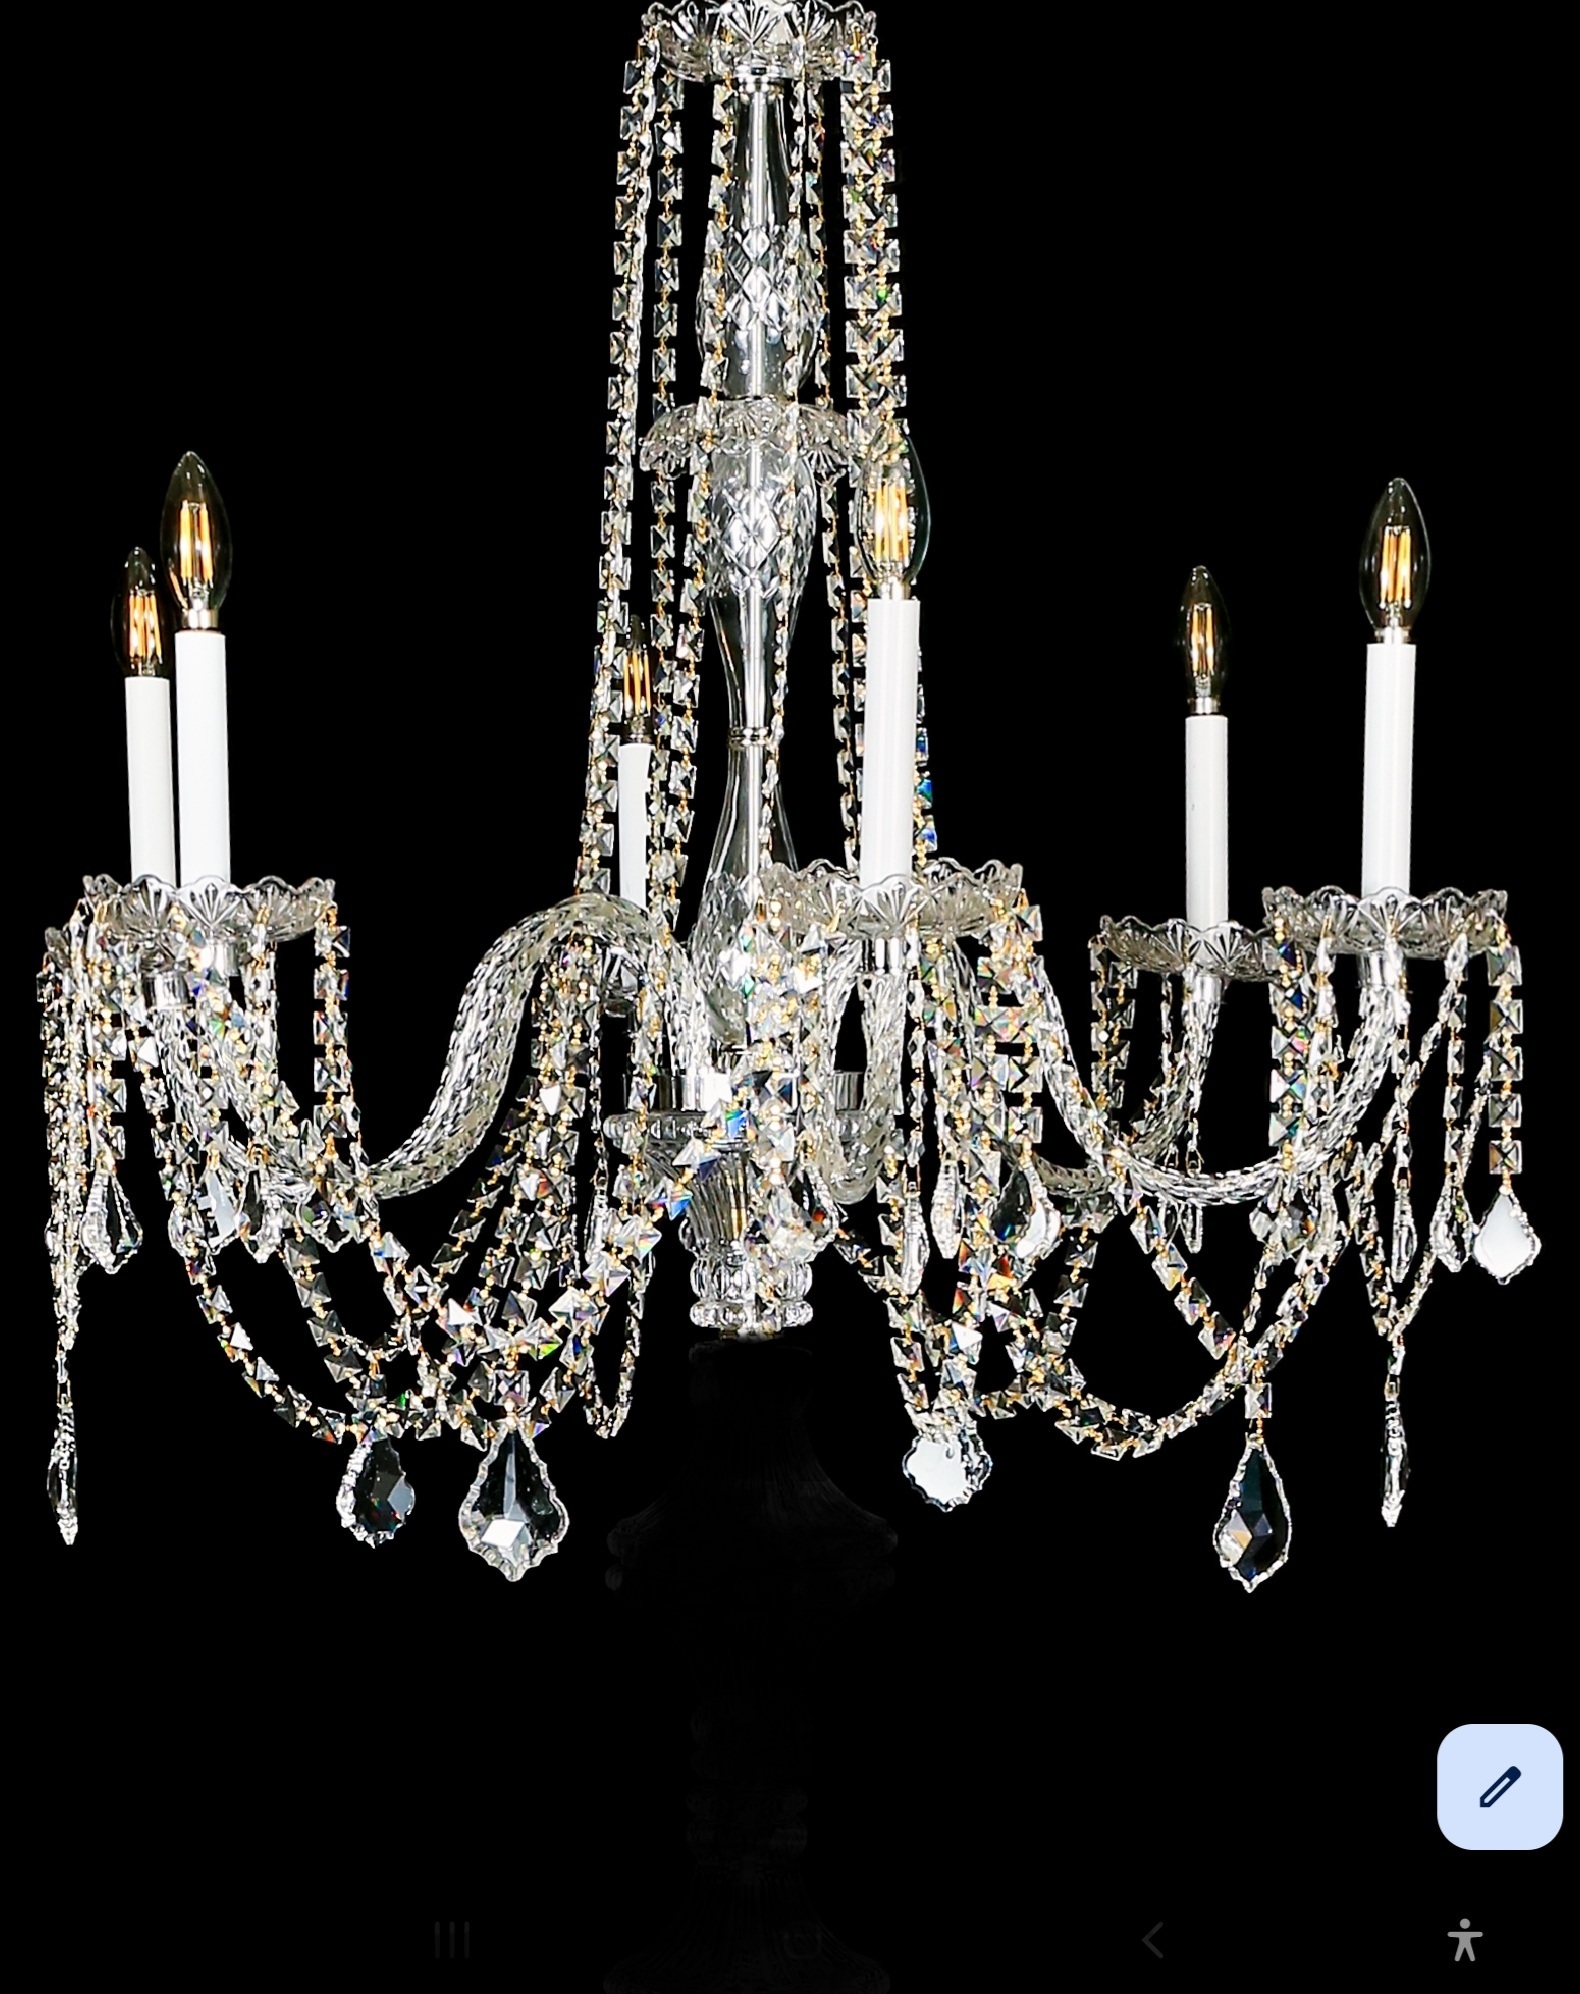 ITEM NO CHAN570 Crystal Chandelier Length 36